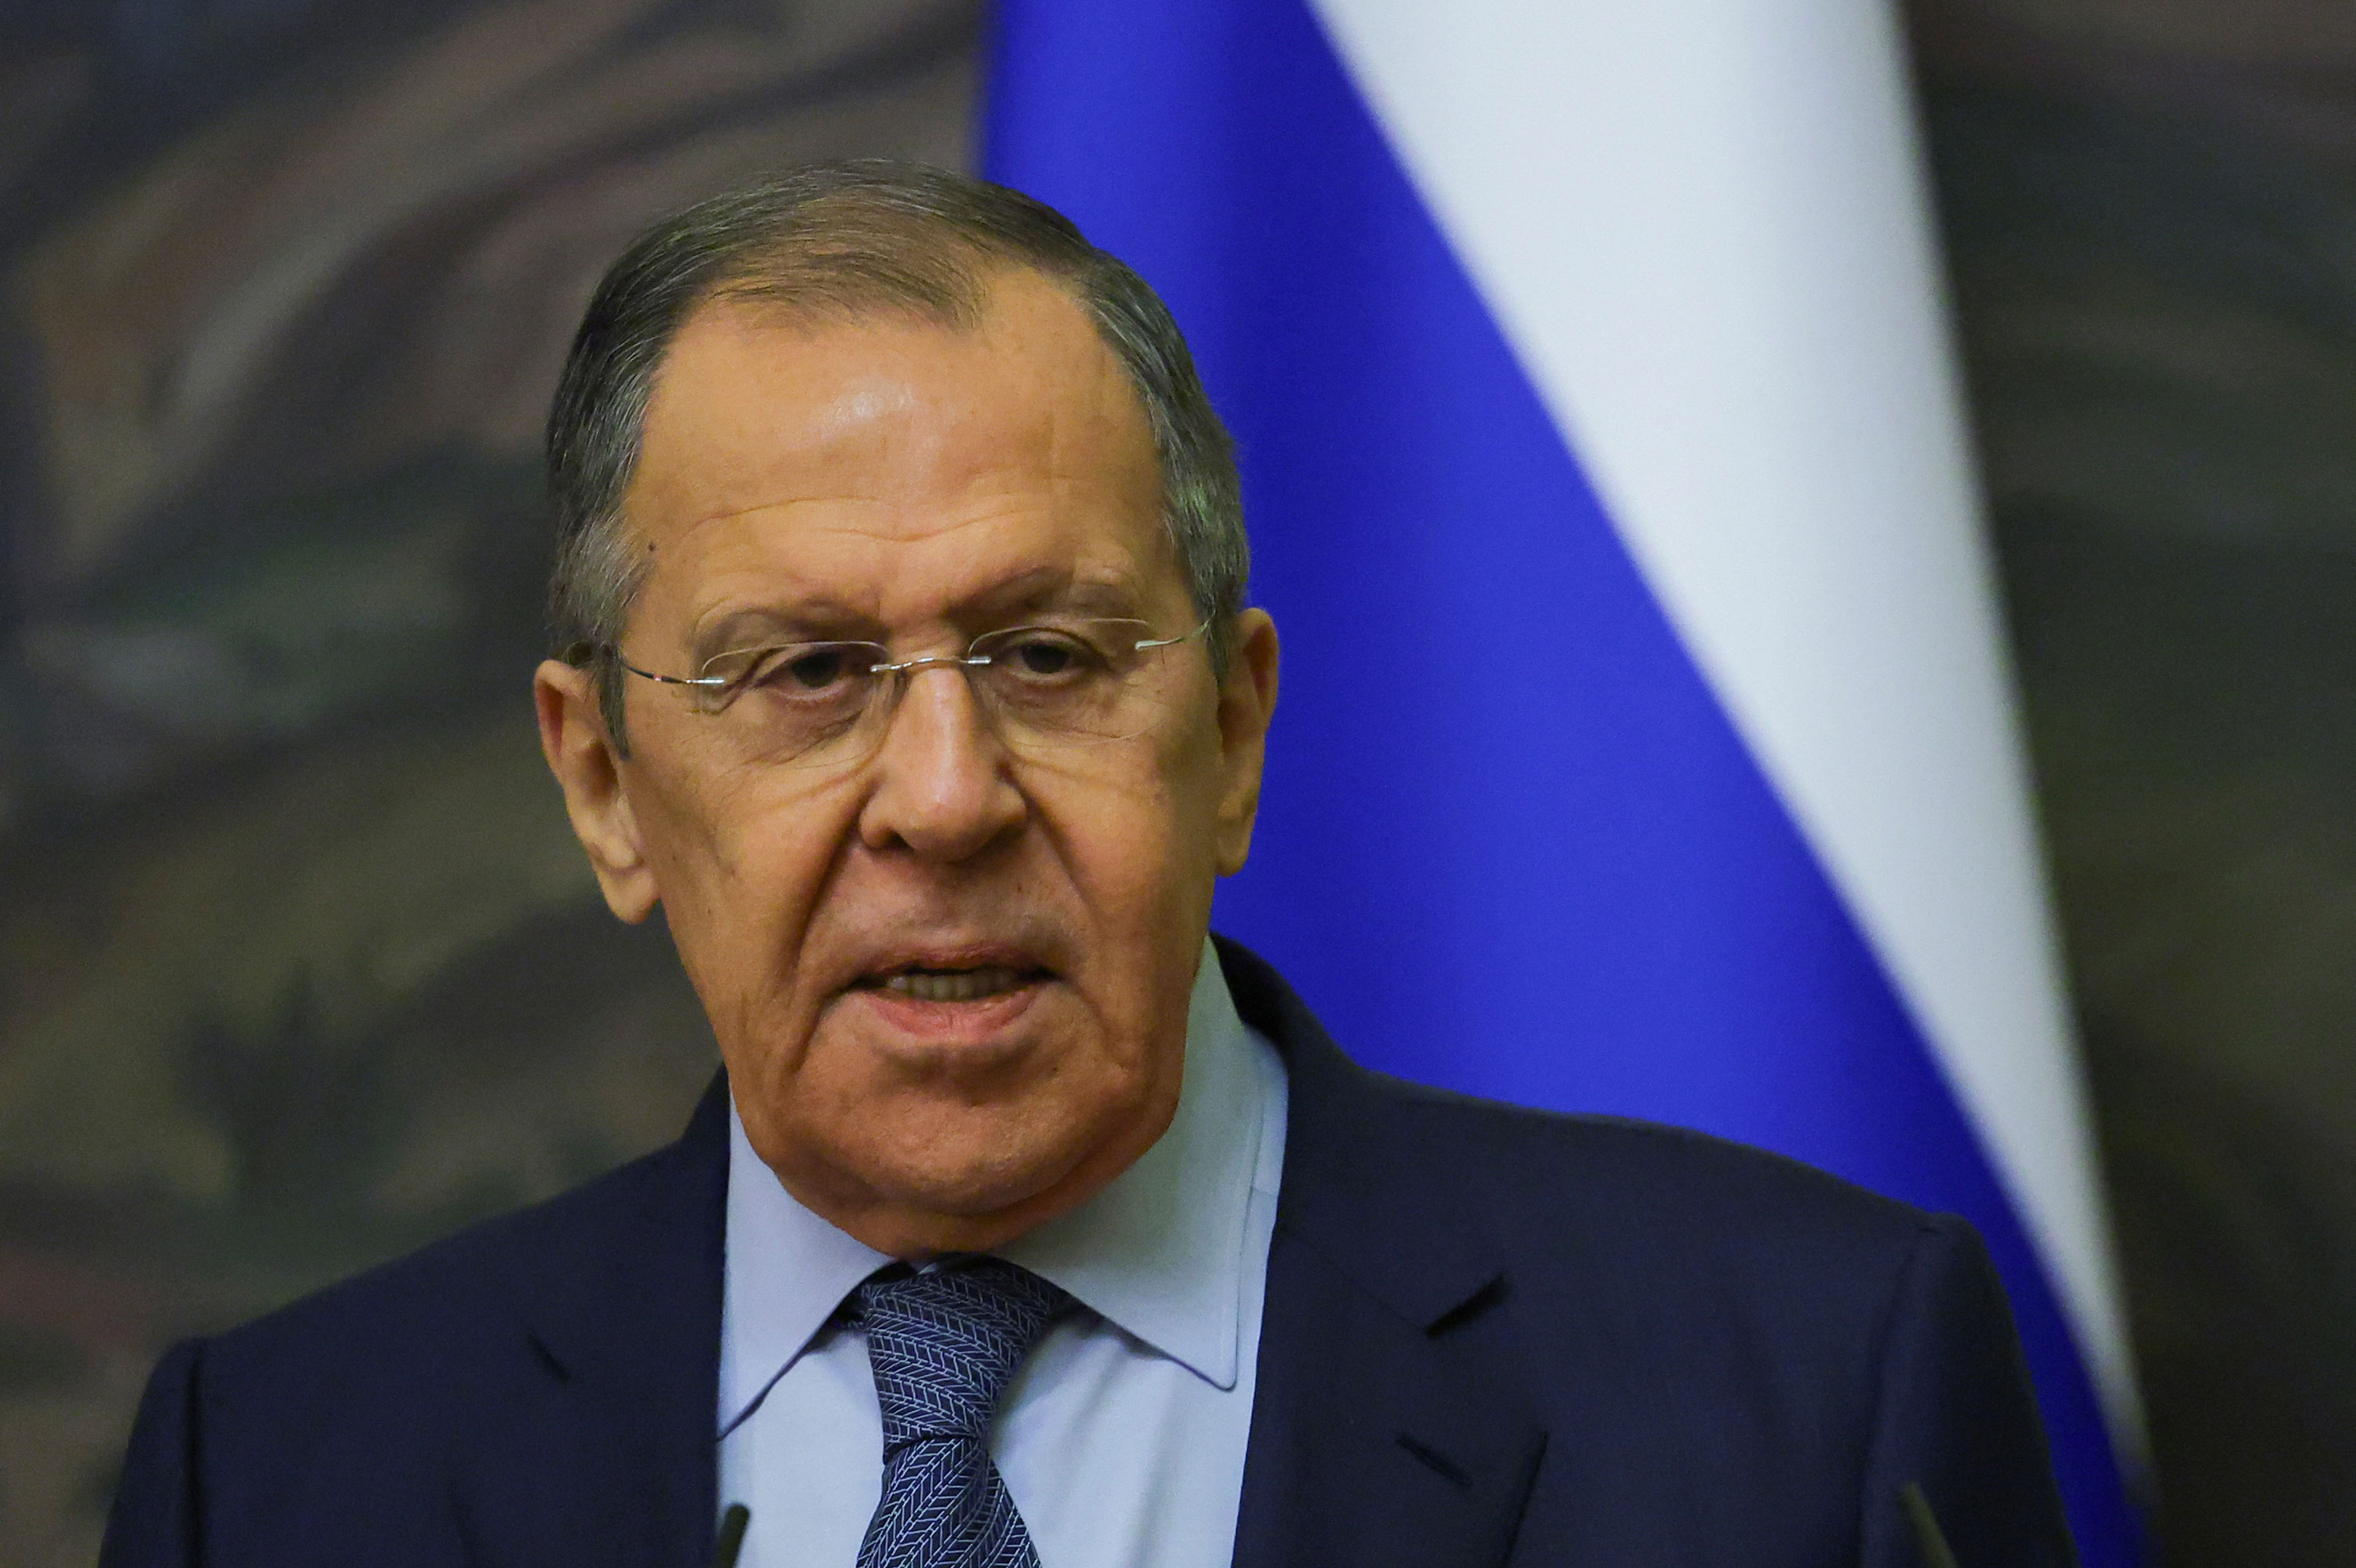 Russian Foreign Minister Sergei Lavrov speaks at a news conference in Moscow on December 23.